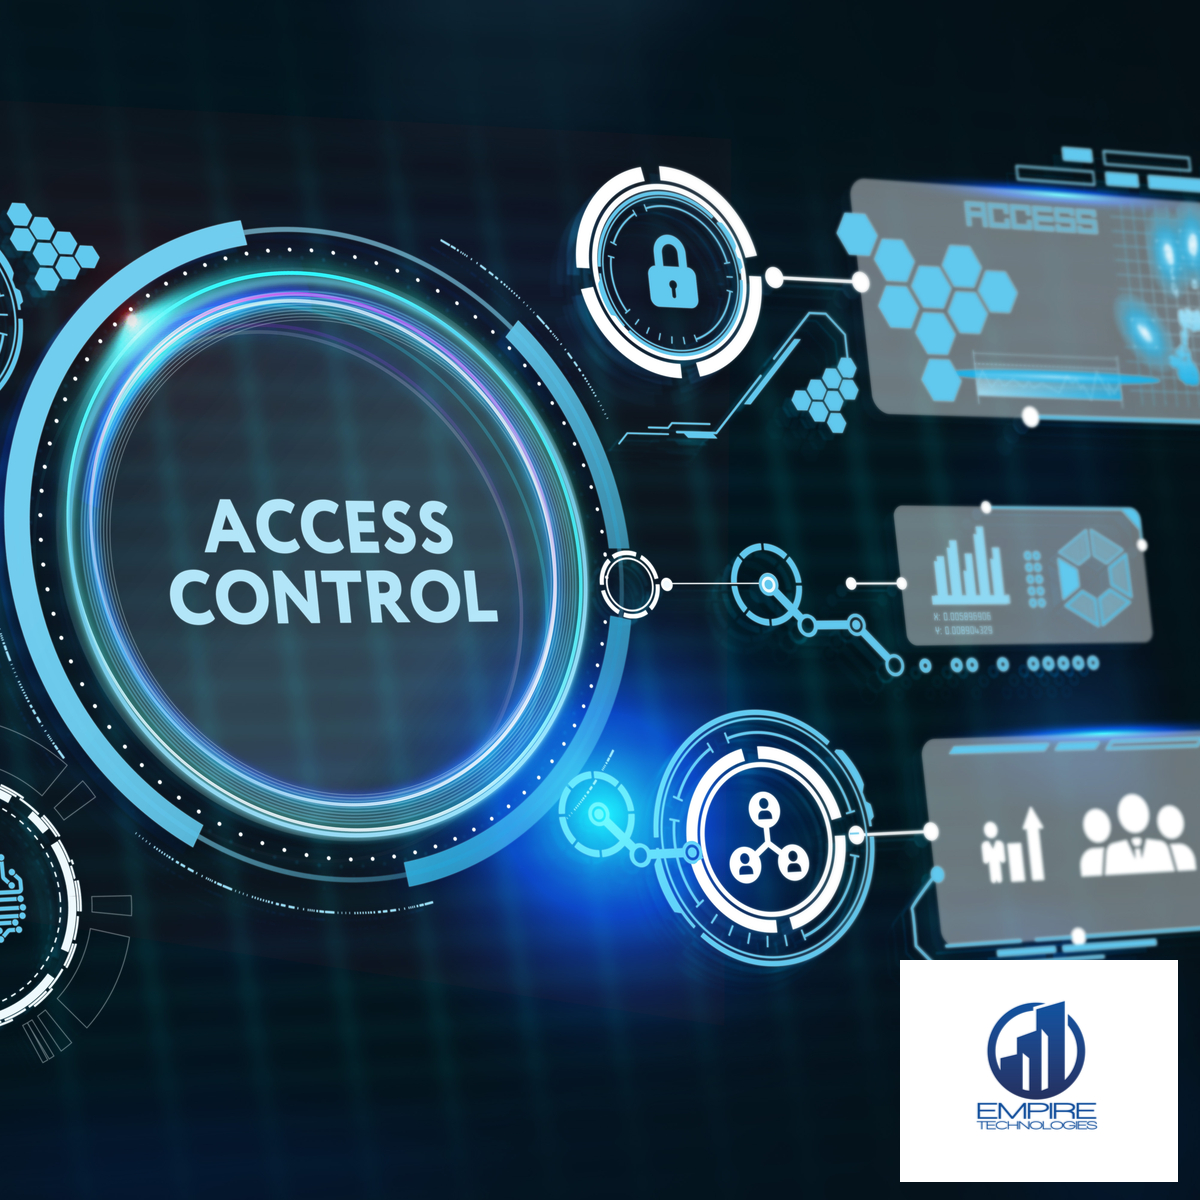 You Haven’t Had Access Control & Surveillance System Installation Yet: Why Not?